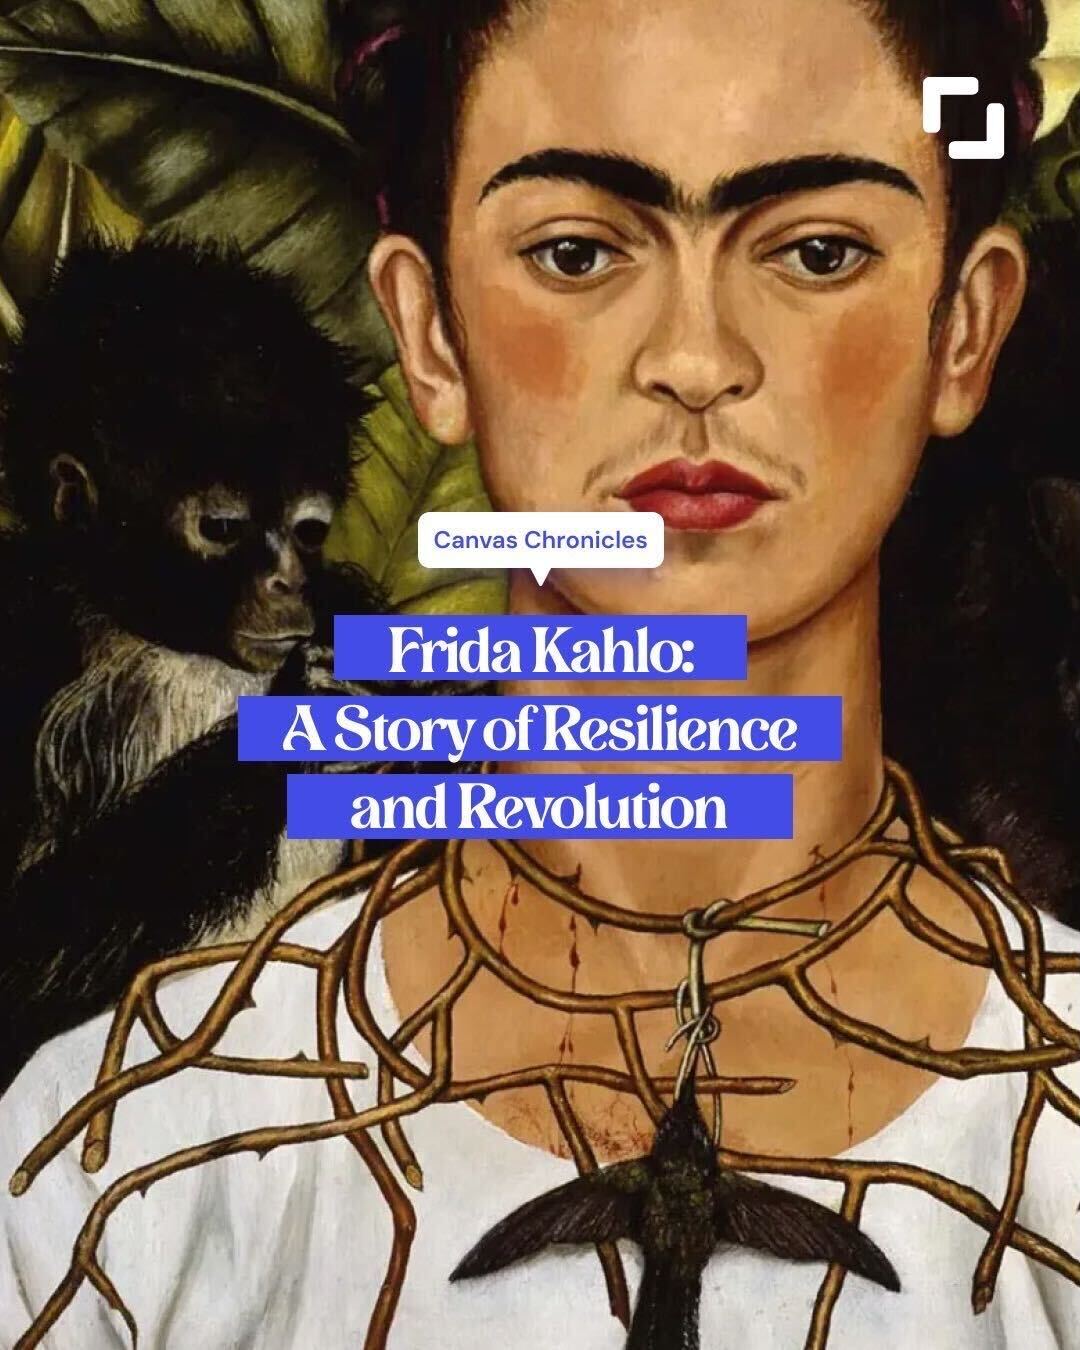 Frida Kahlo: A Story of Resilience and Revolution